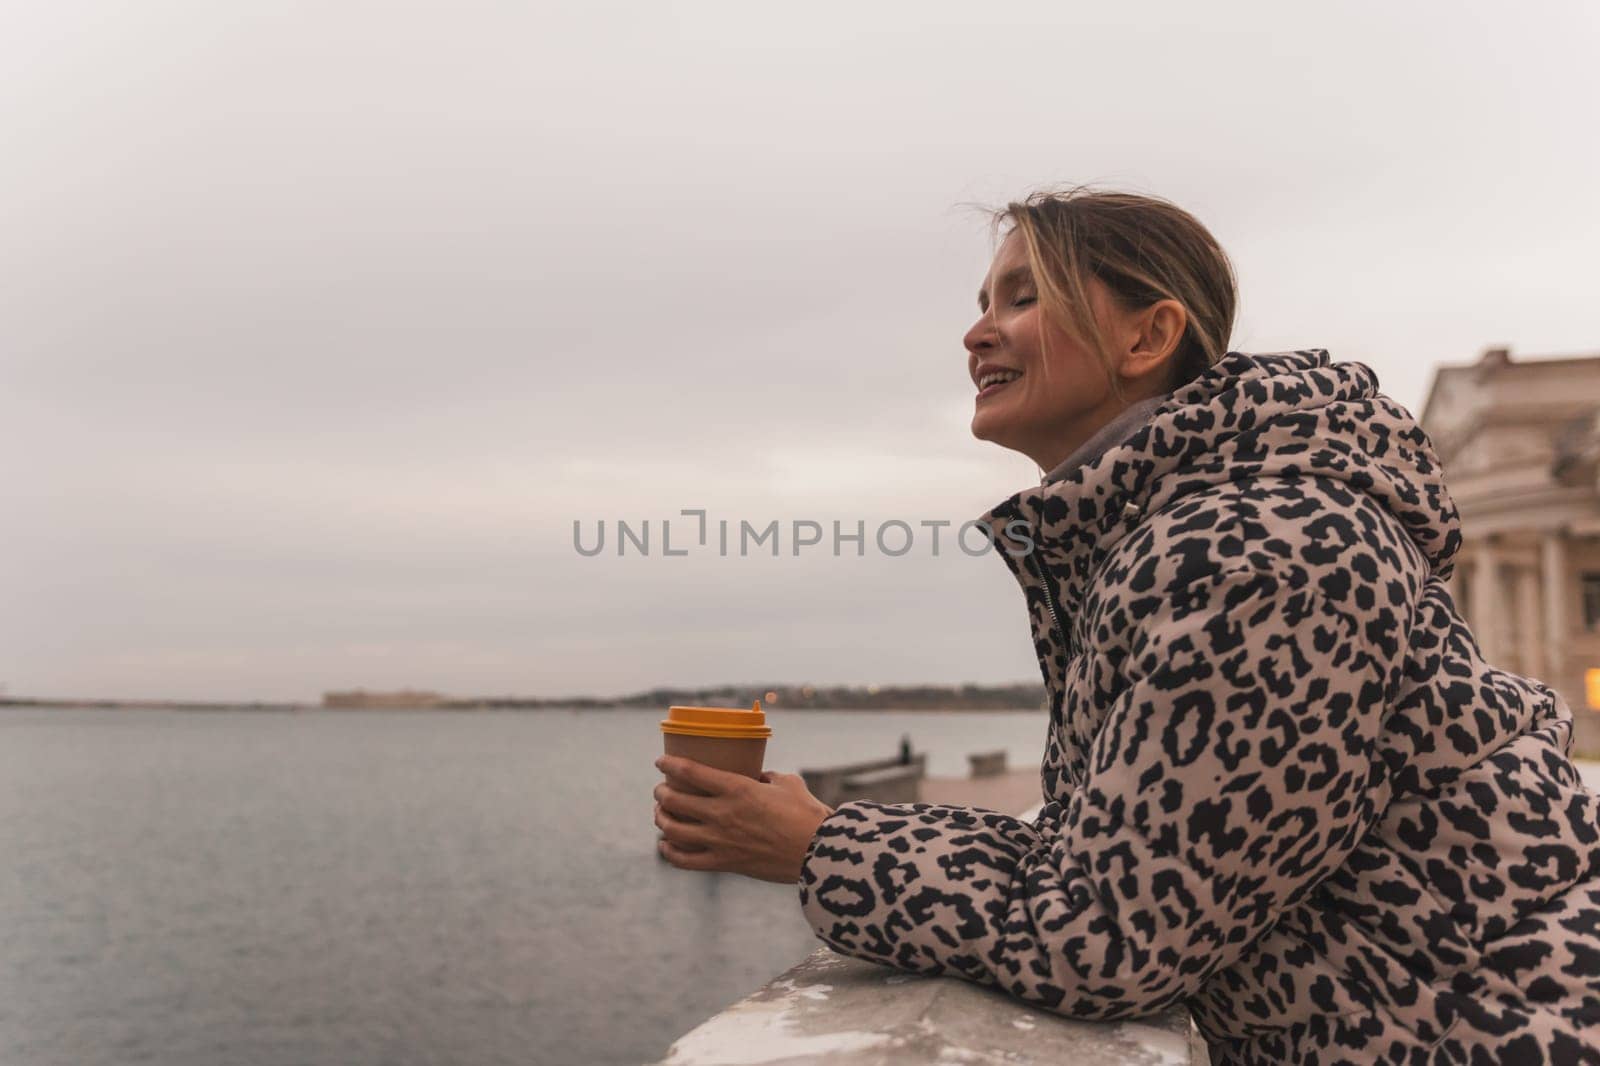 A woman in a leopard print coat is holding a coffee cup and looking out at the water